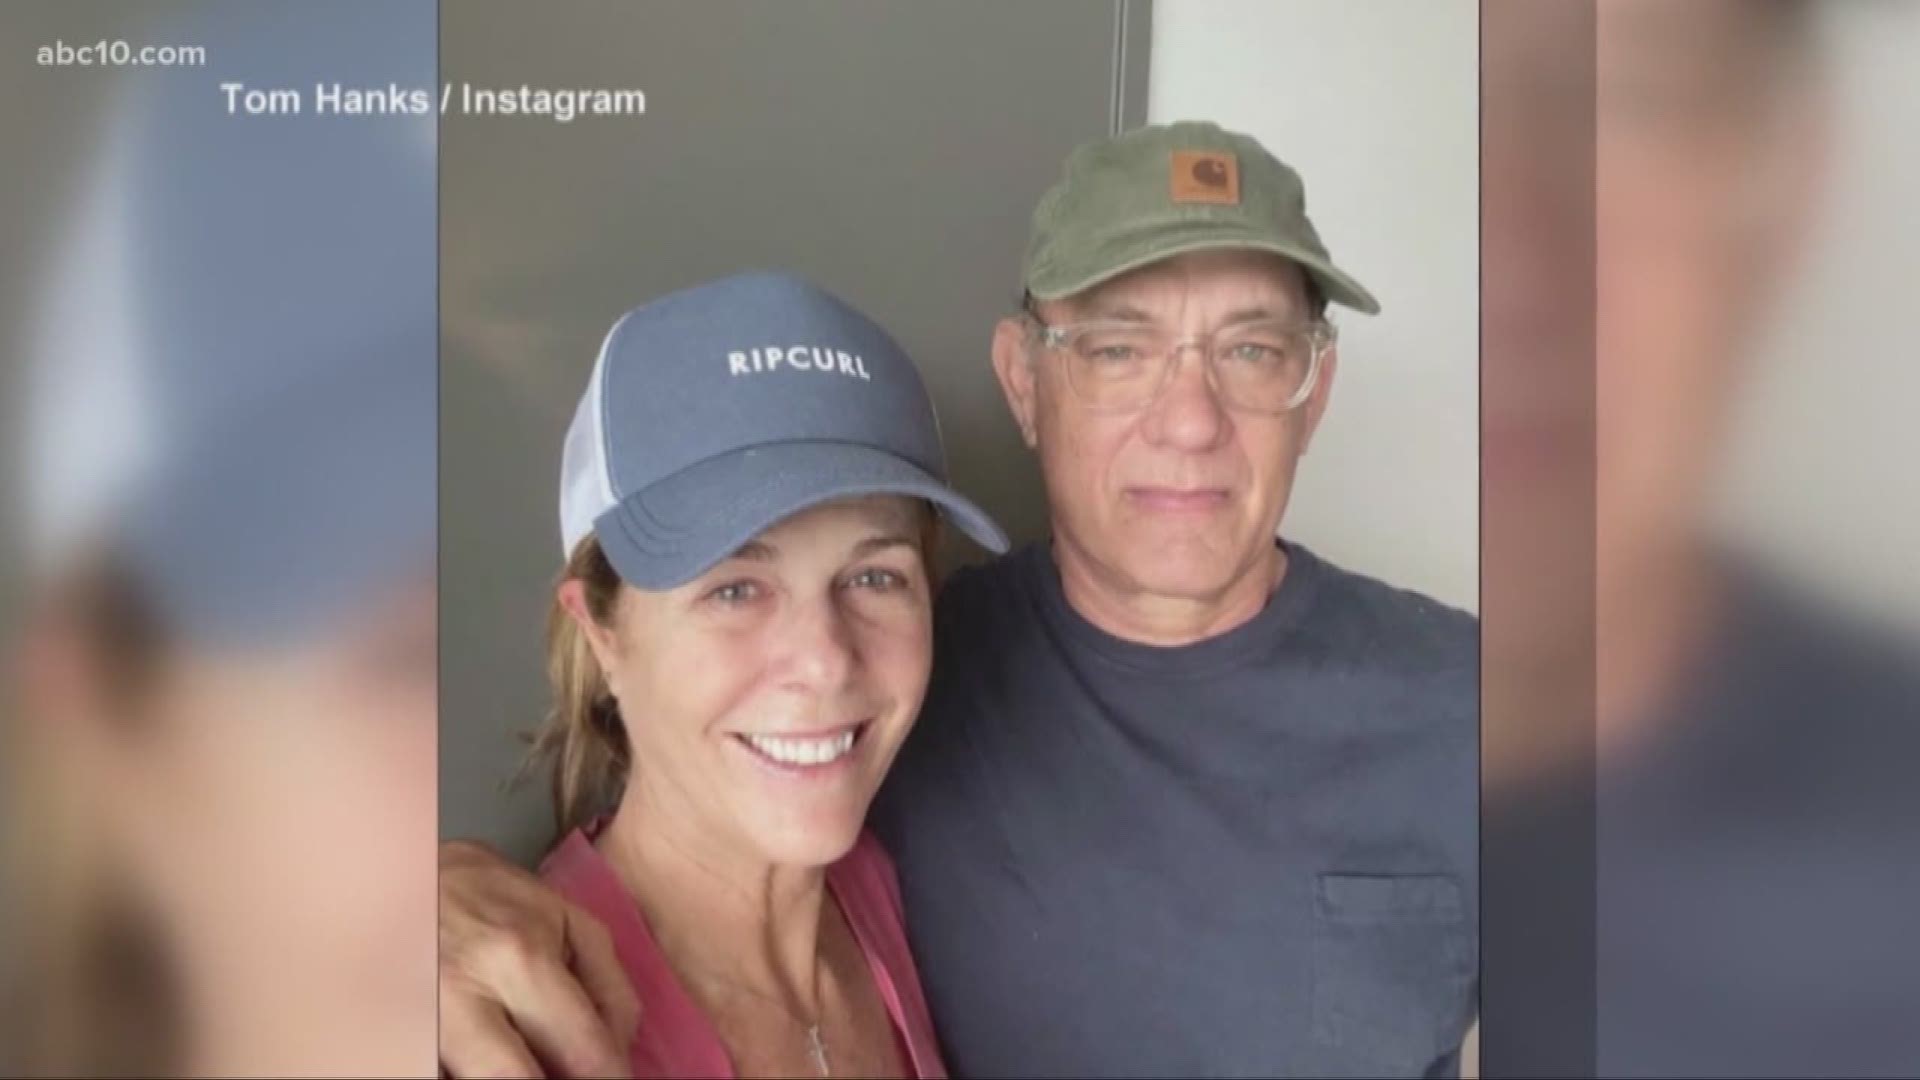 In today's entertainment news roundup, Tom Hanks and Rita Wilson are finally back home in California, Google will forgo its annual April Fools' joke, and more!